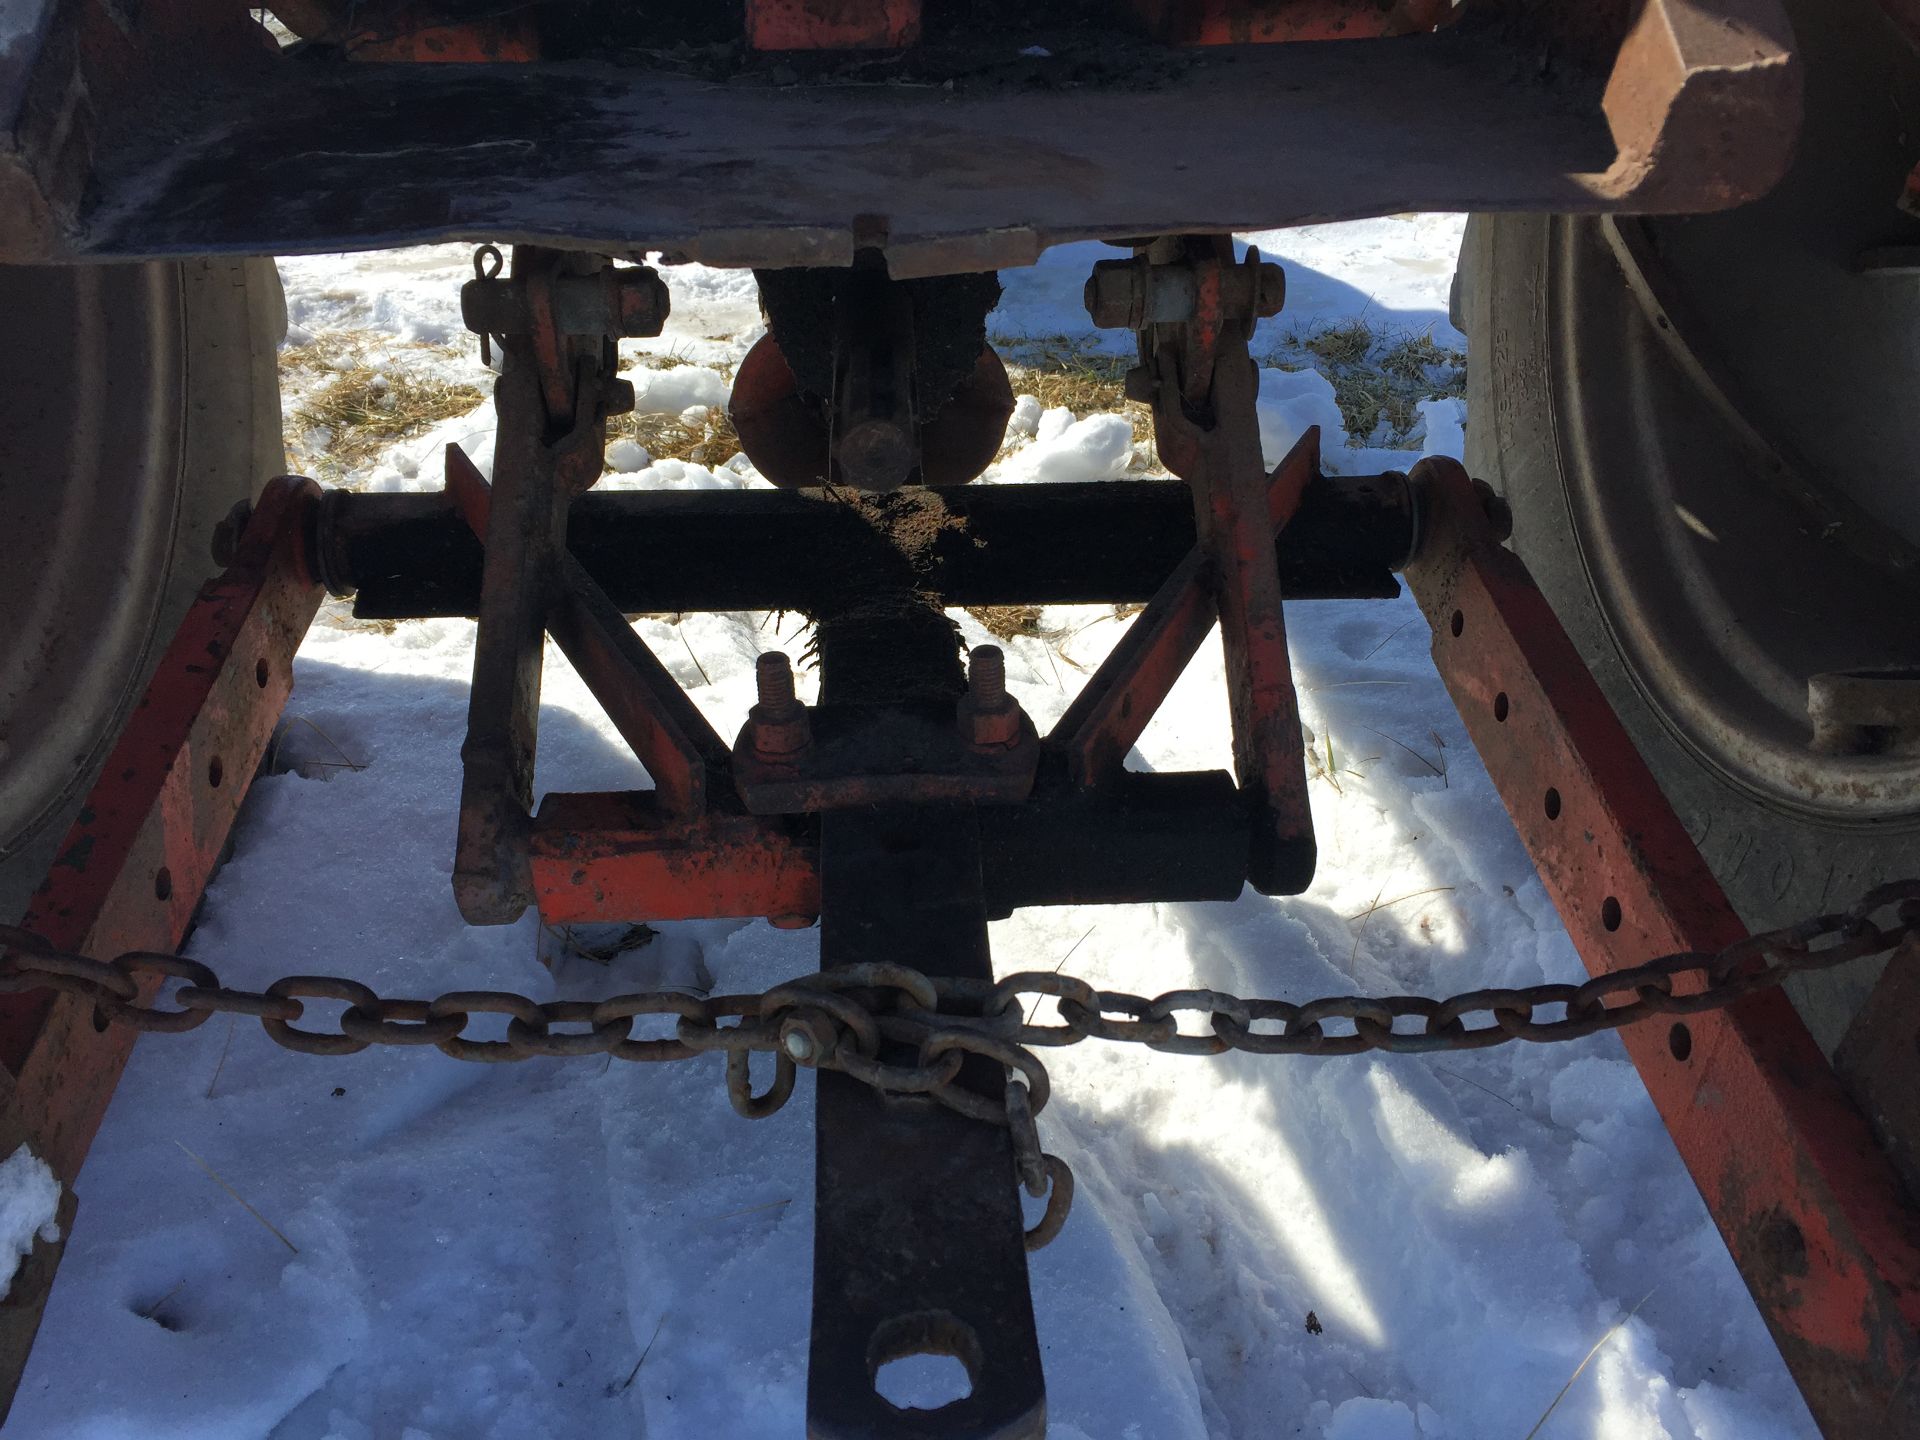 Allis Chalmers WD45 Tractor, narrow front, 3pt hitch, runs good - Image 8 of 10